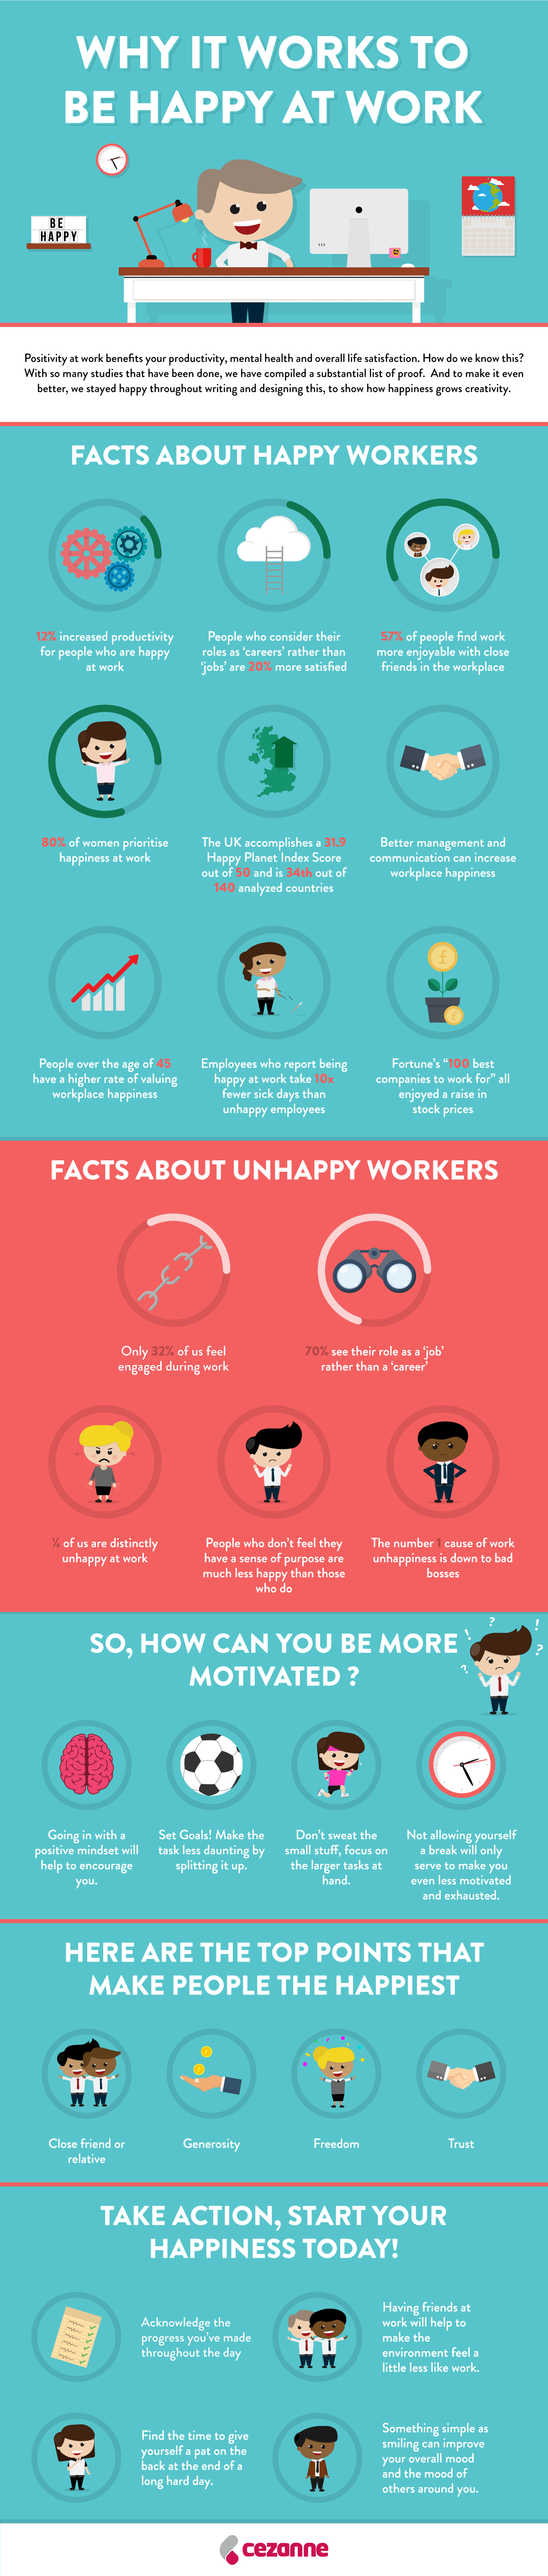 How to work well. Why work. Facts about workers. Facts about thinking.